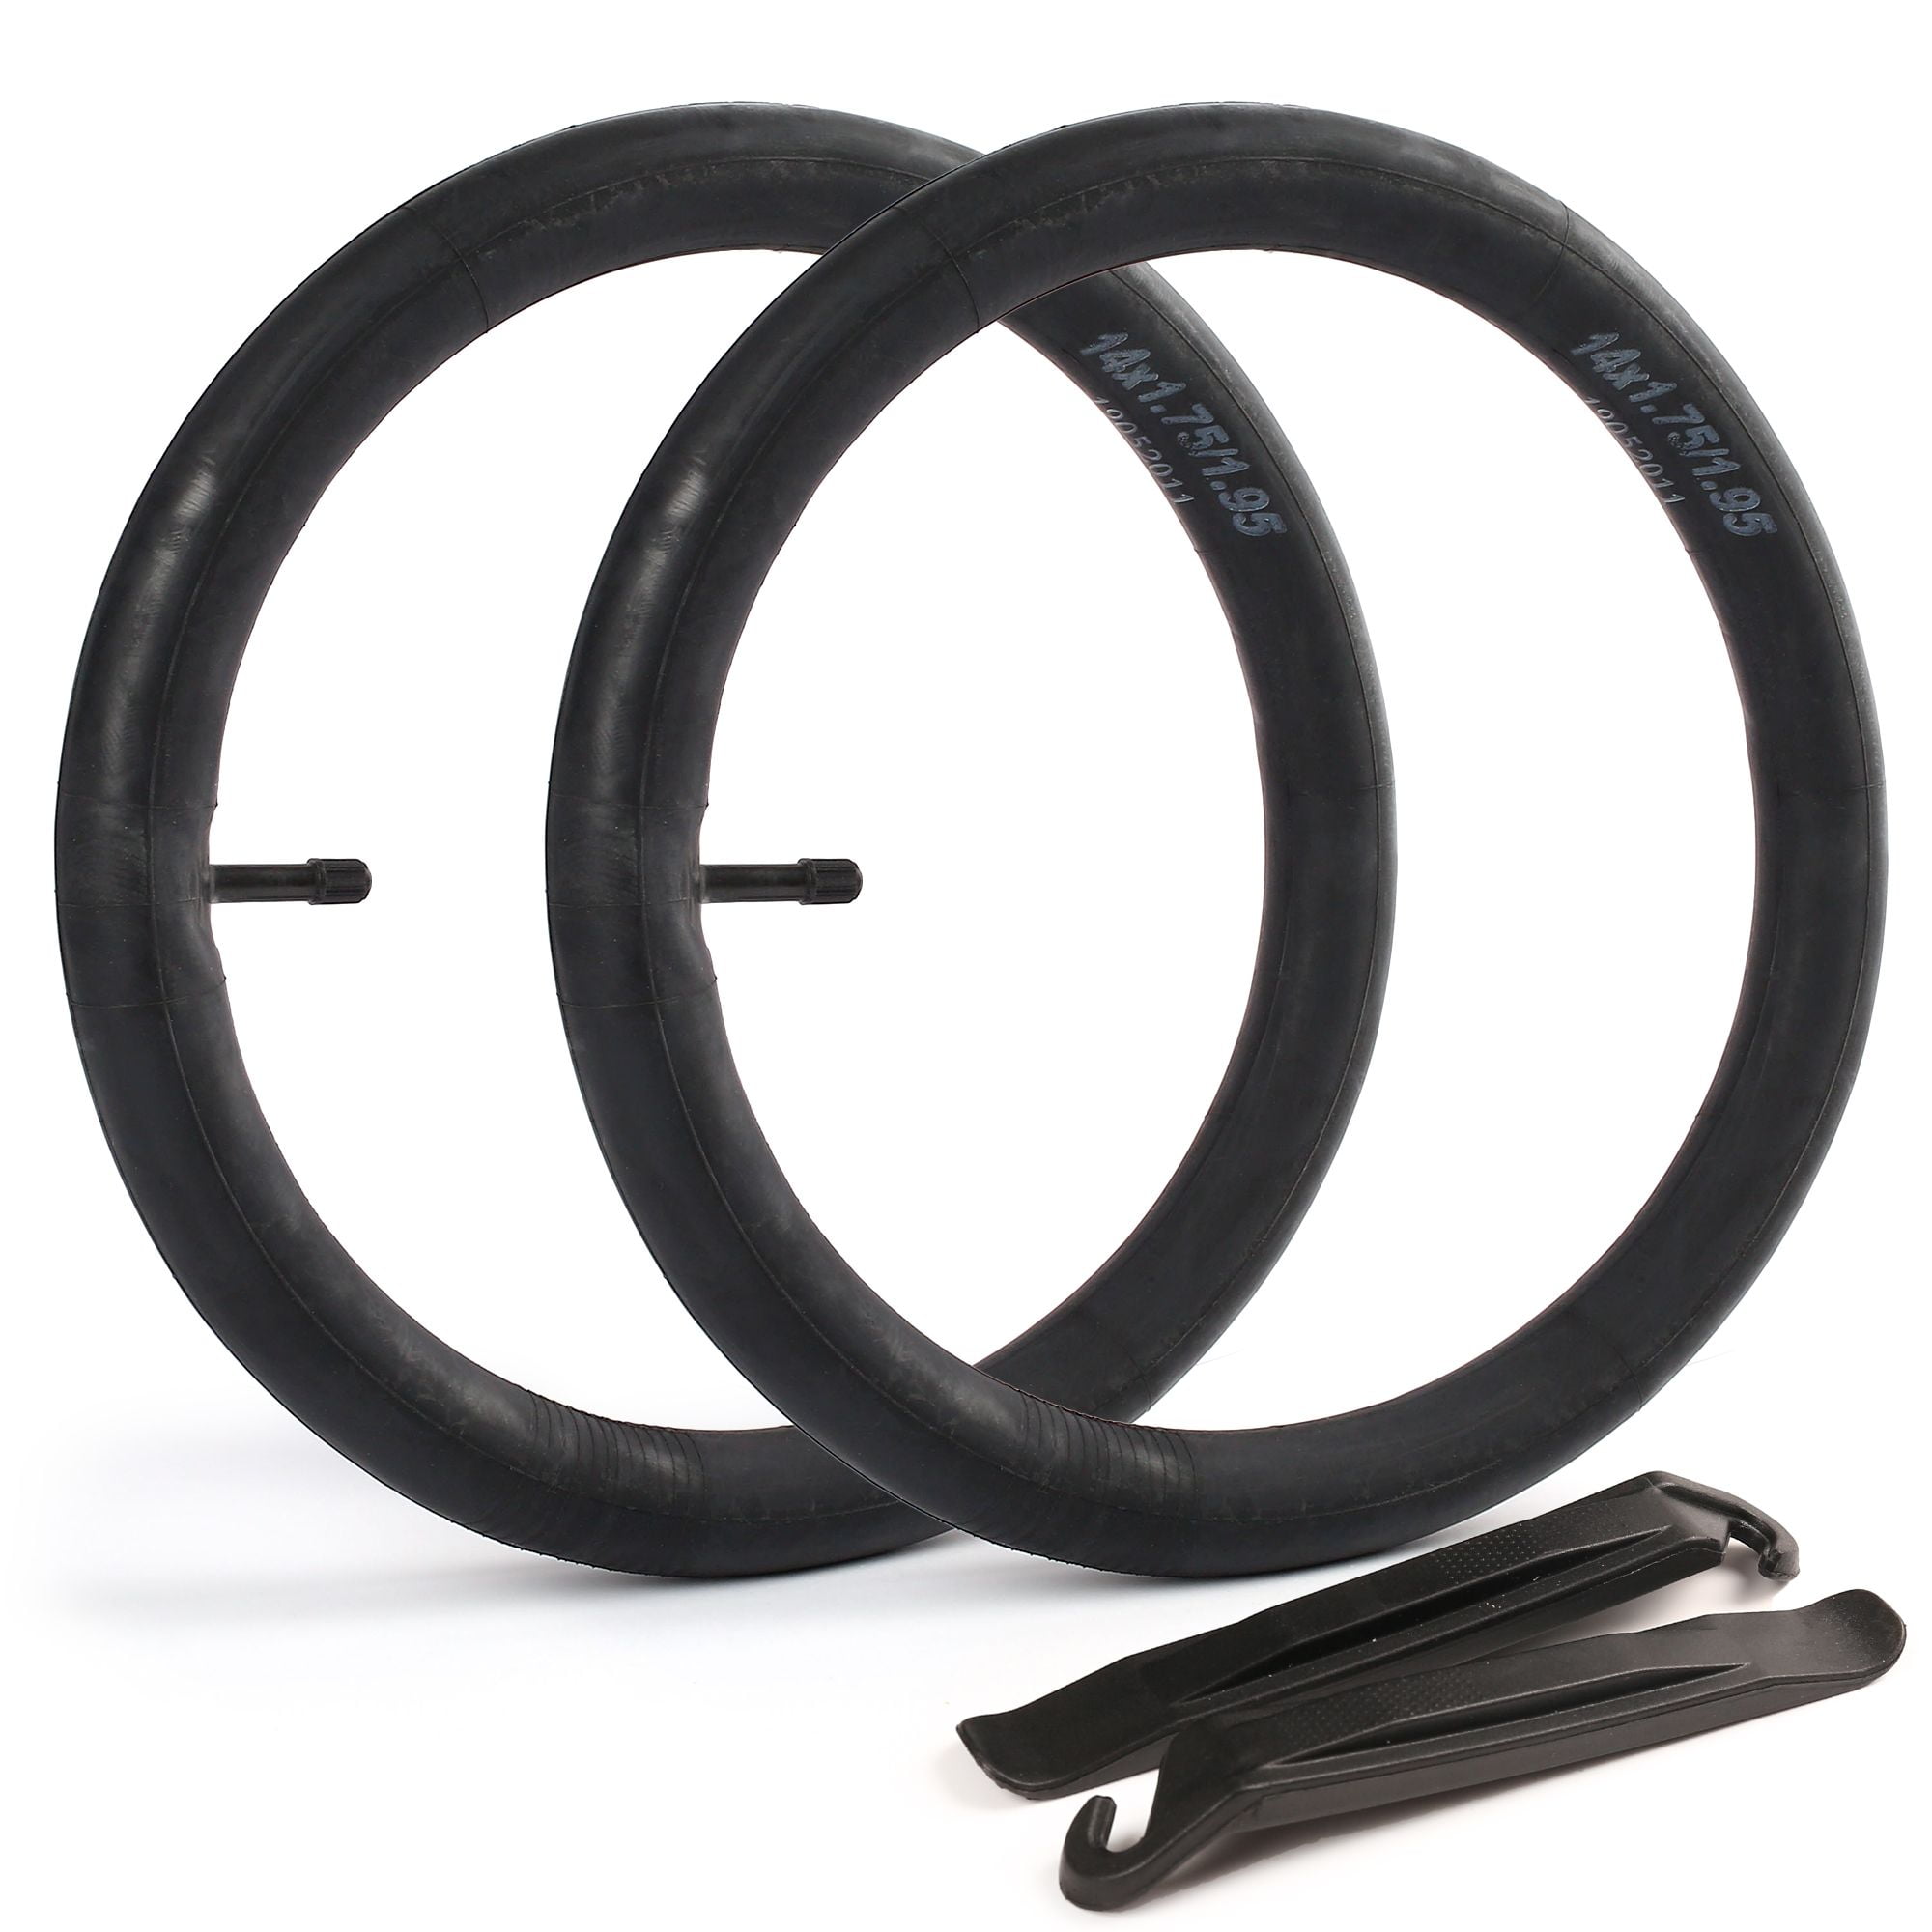 New 2x 24" inch Bike Tube 24 x1.75 1.95 2.125 Bicycle Rubber Tire Interior US 